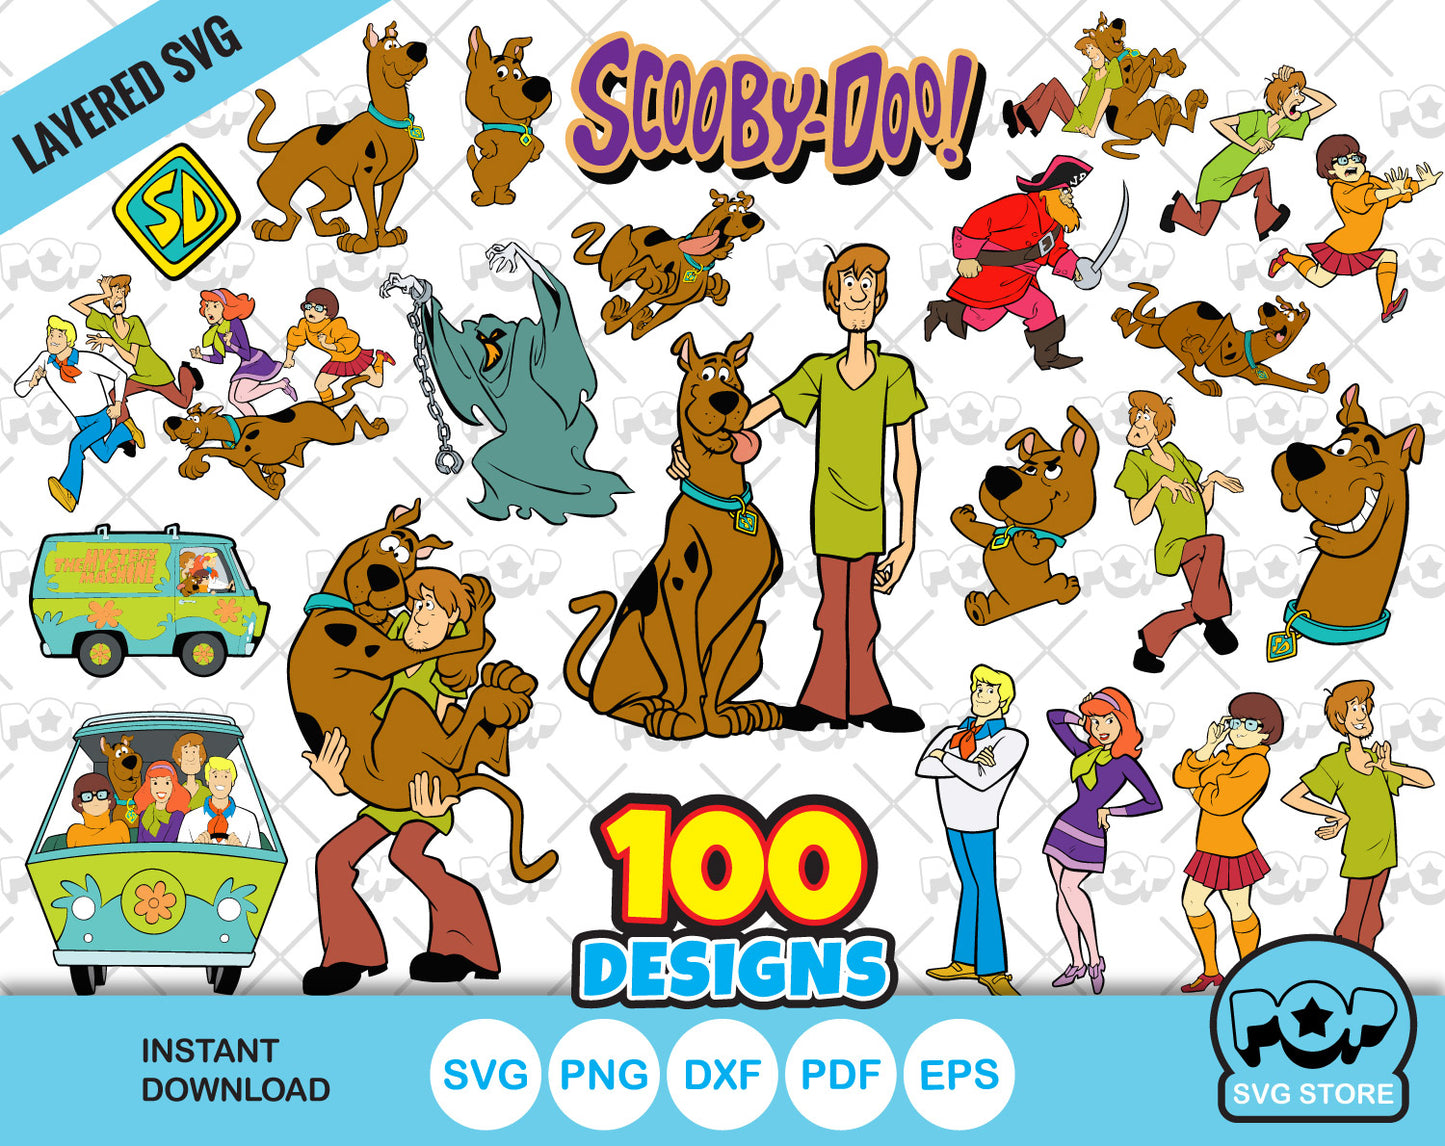 Scooby-Doo clipart bundle, Scooby Doo SVG cut files for Cricut / Silhouette, PNG, DXF, instant download